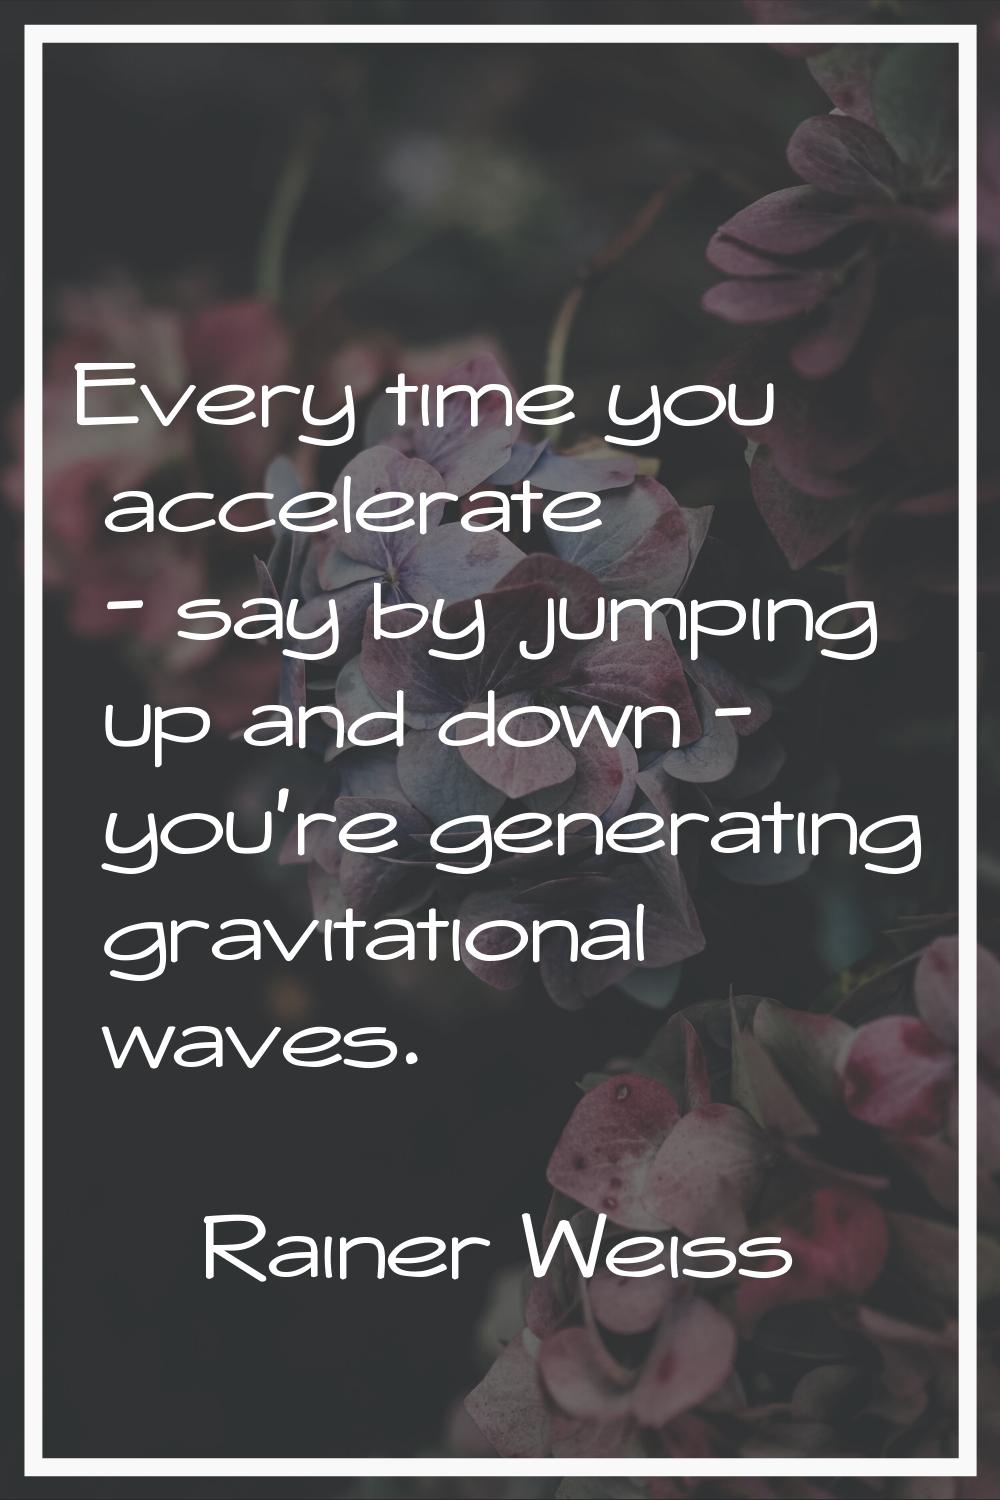 Every time you accelerate - say by jumping up and down - you're generating gravitational waves.